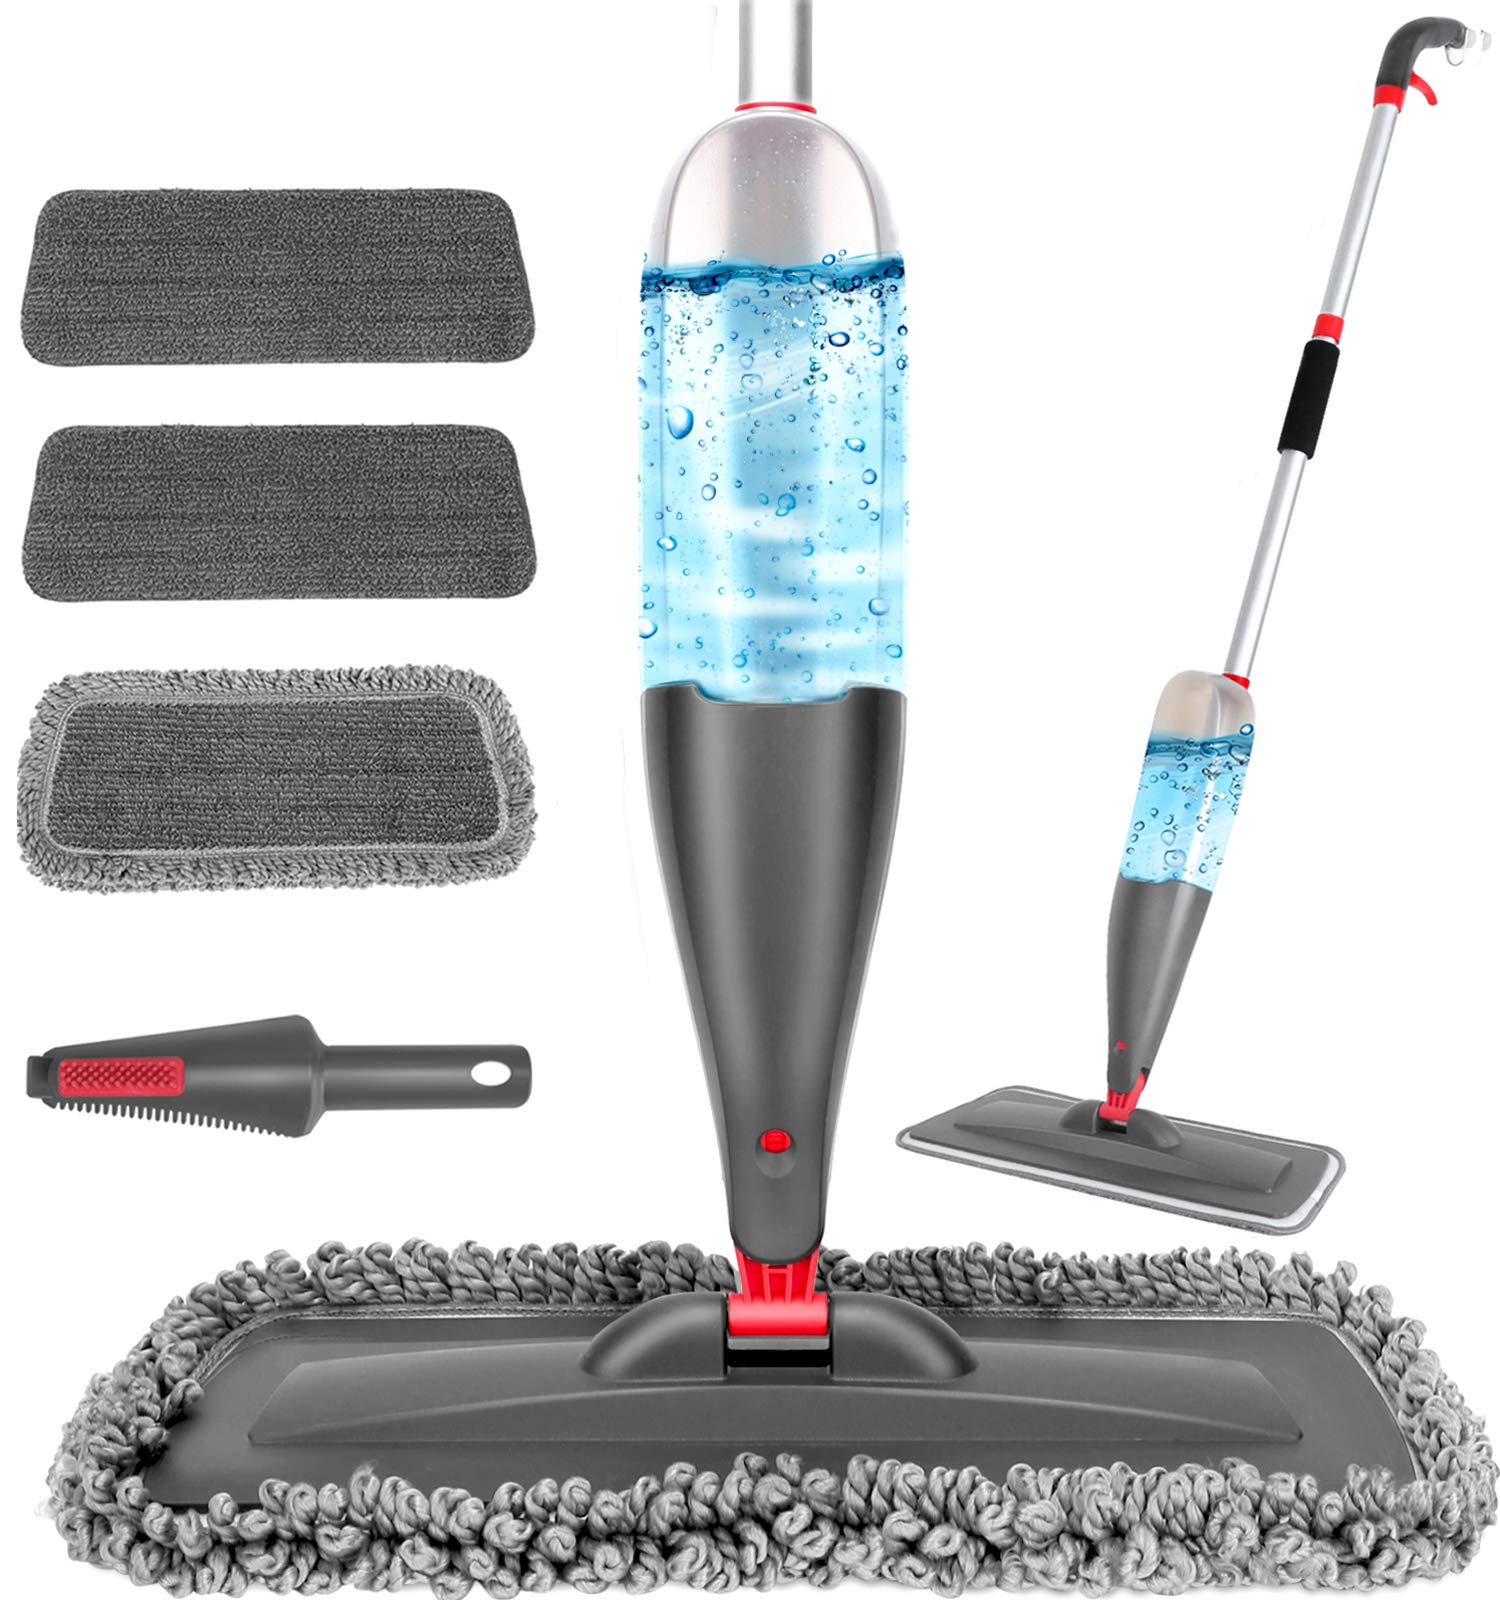 CLDREAM Spray Mop for Floor Cleaning